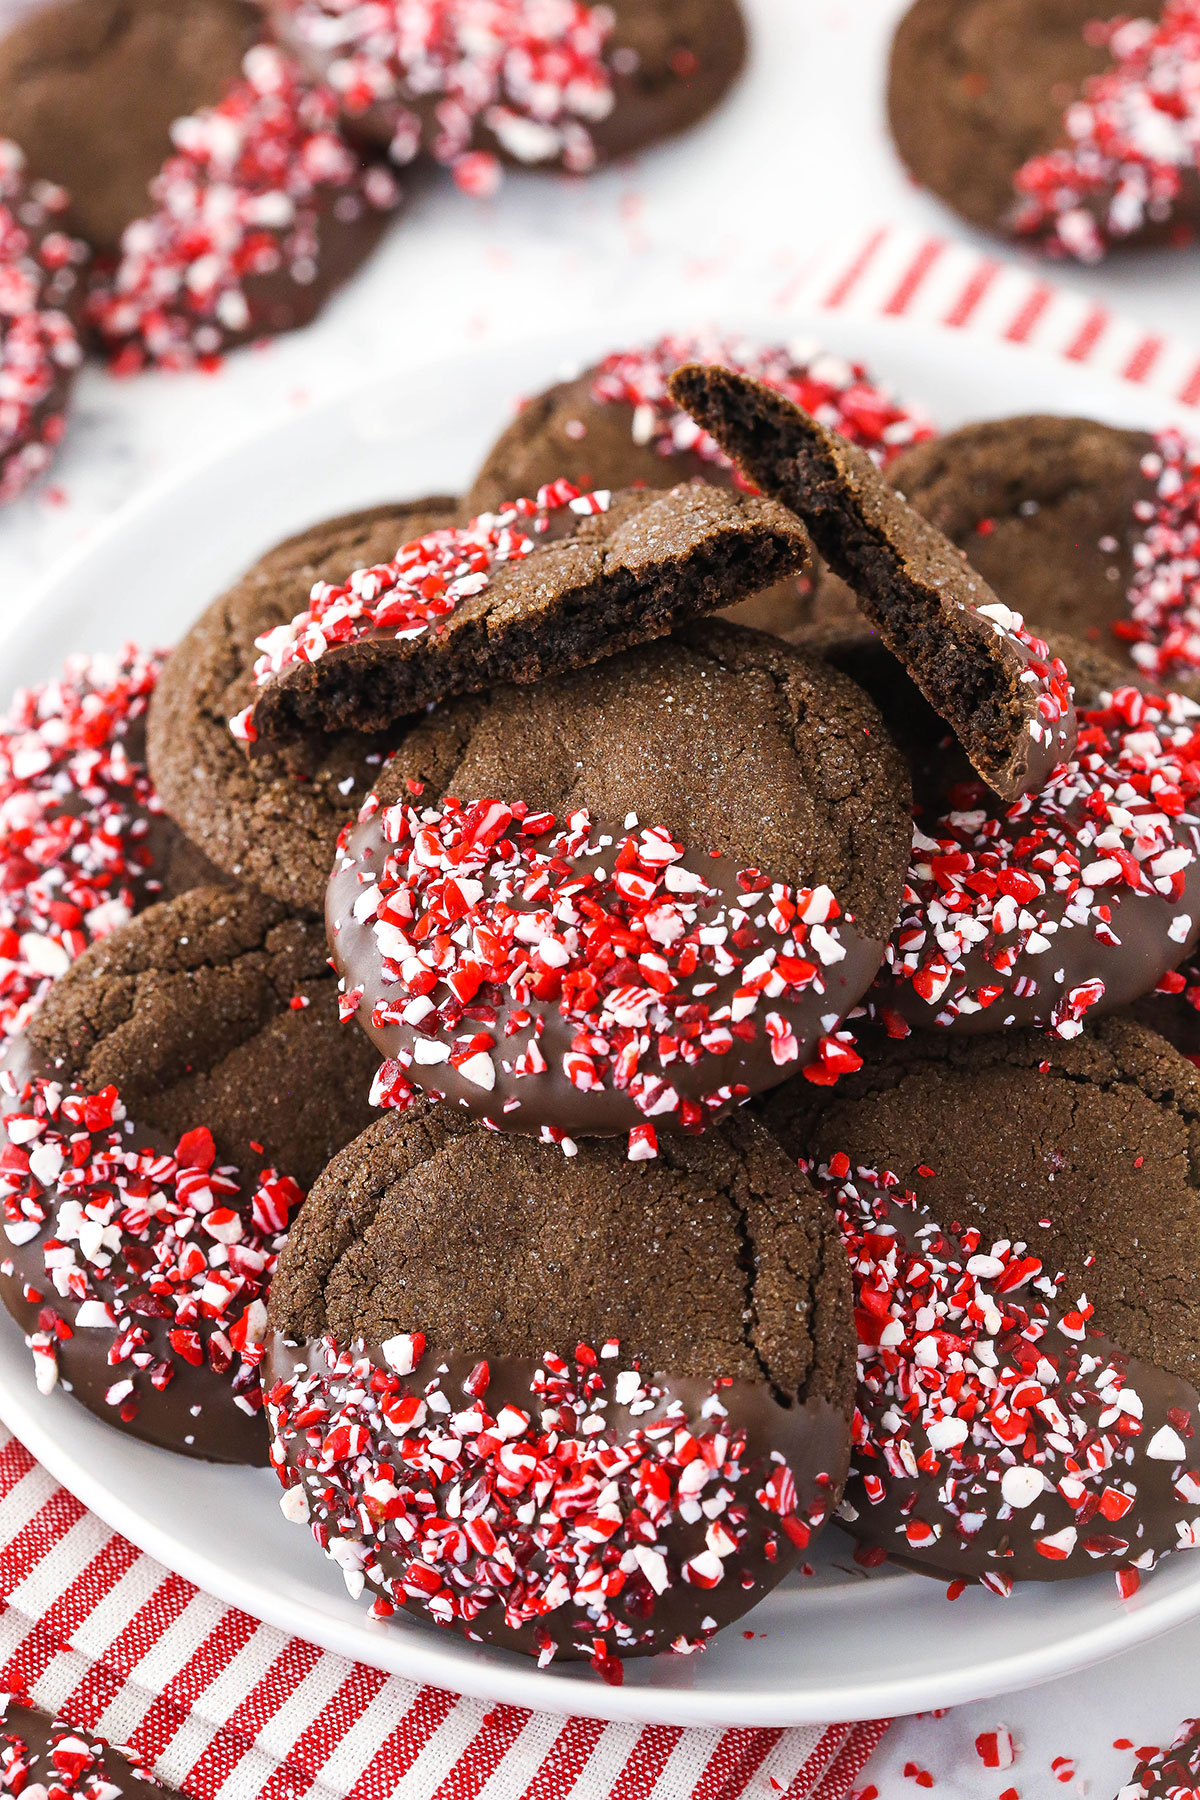 A pile of double chocolate Christmas cookies on a plate on top of a striped dish towel